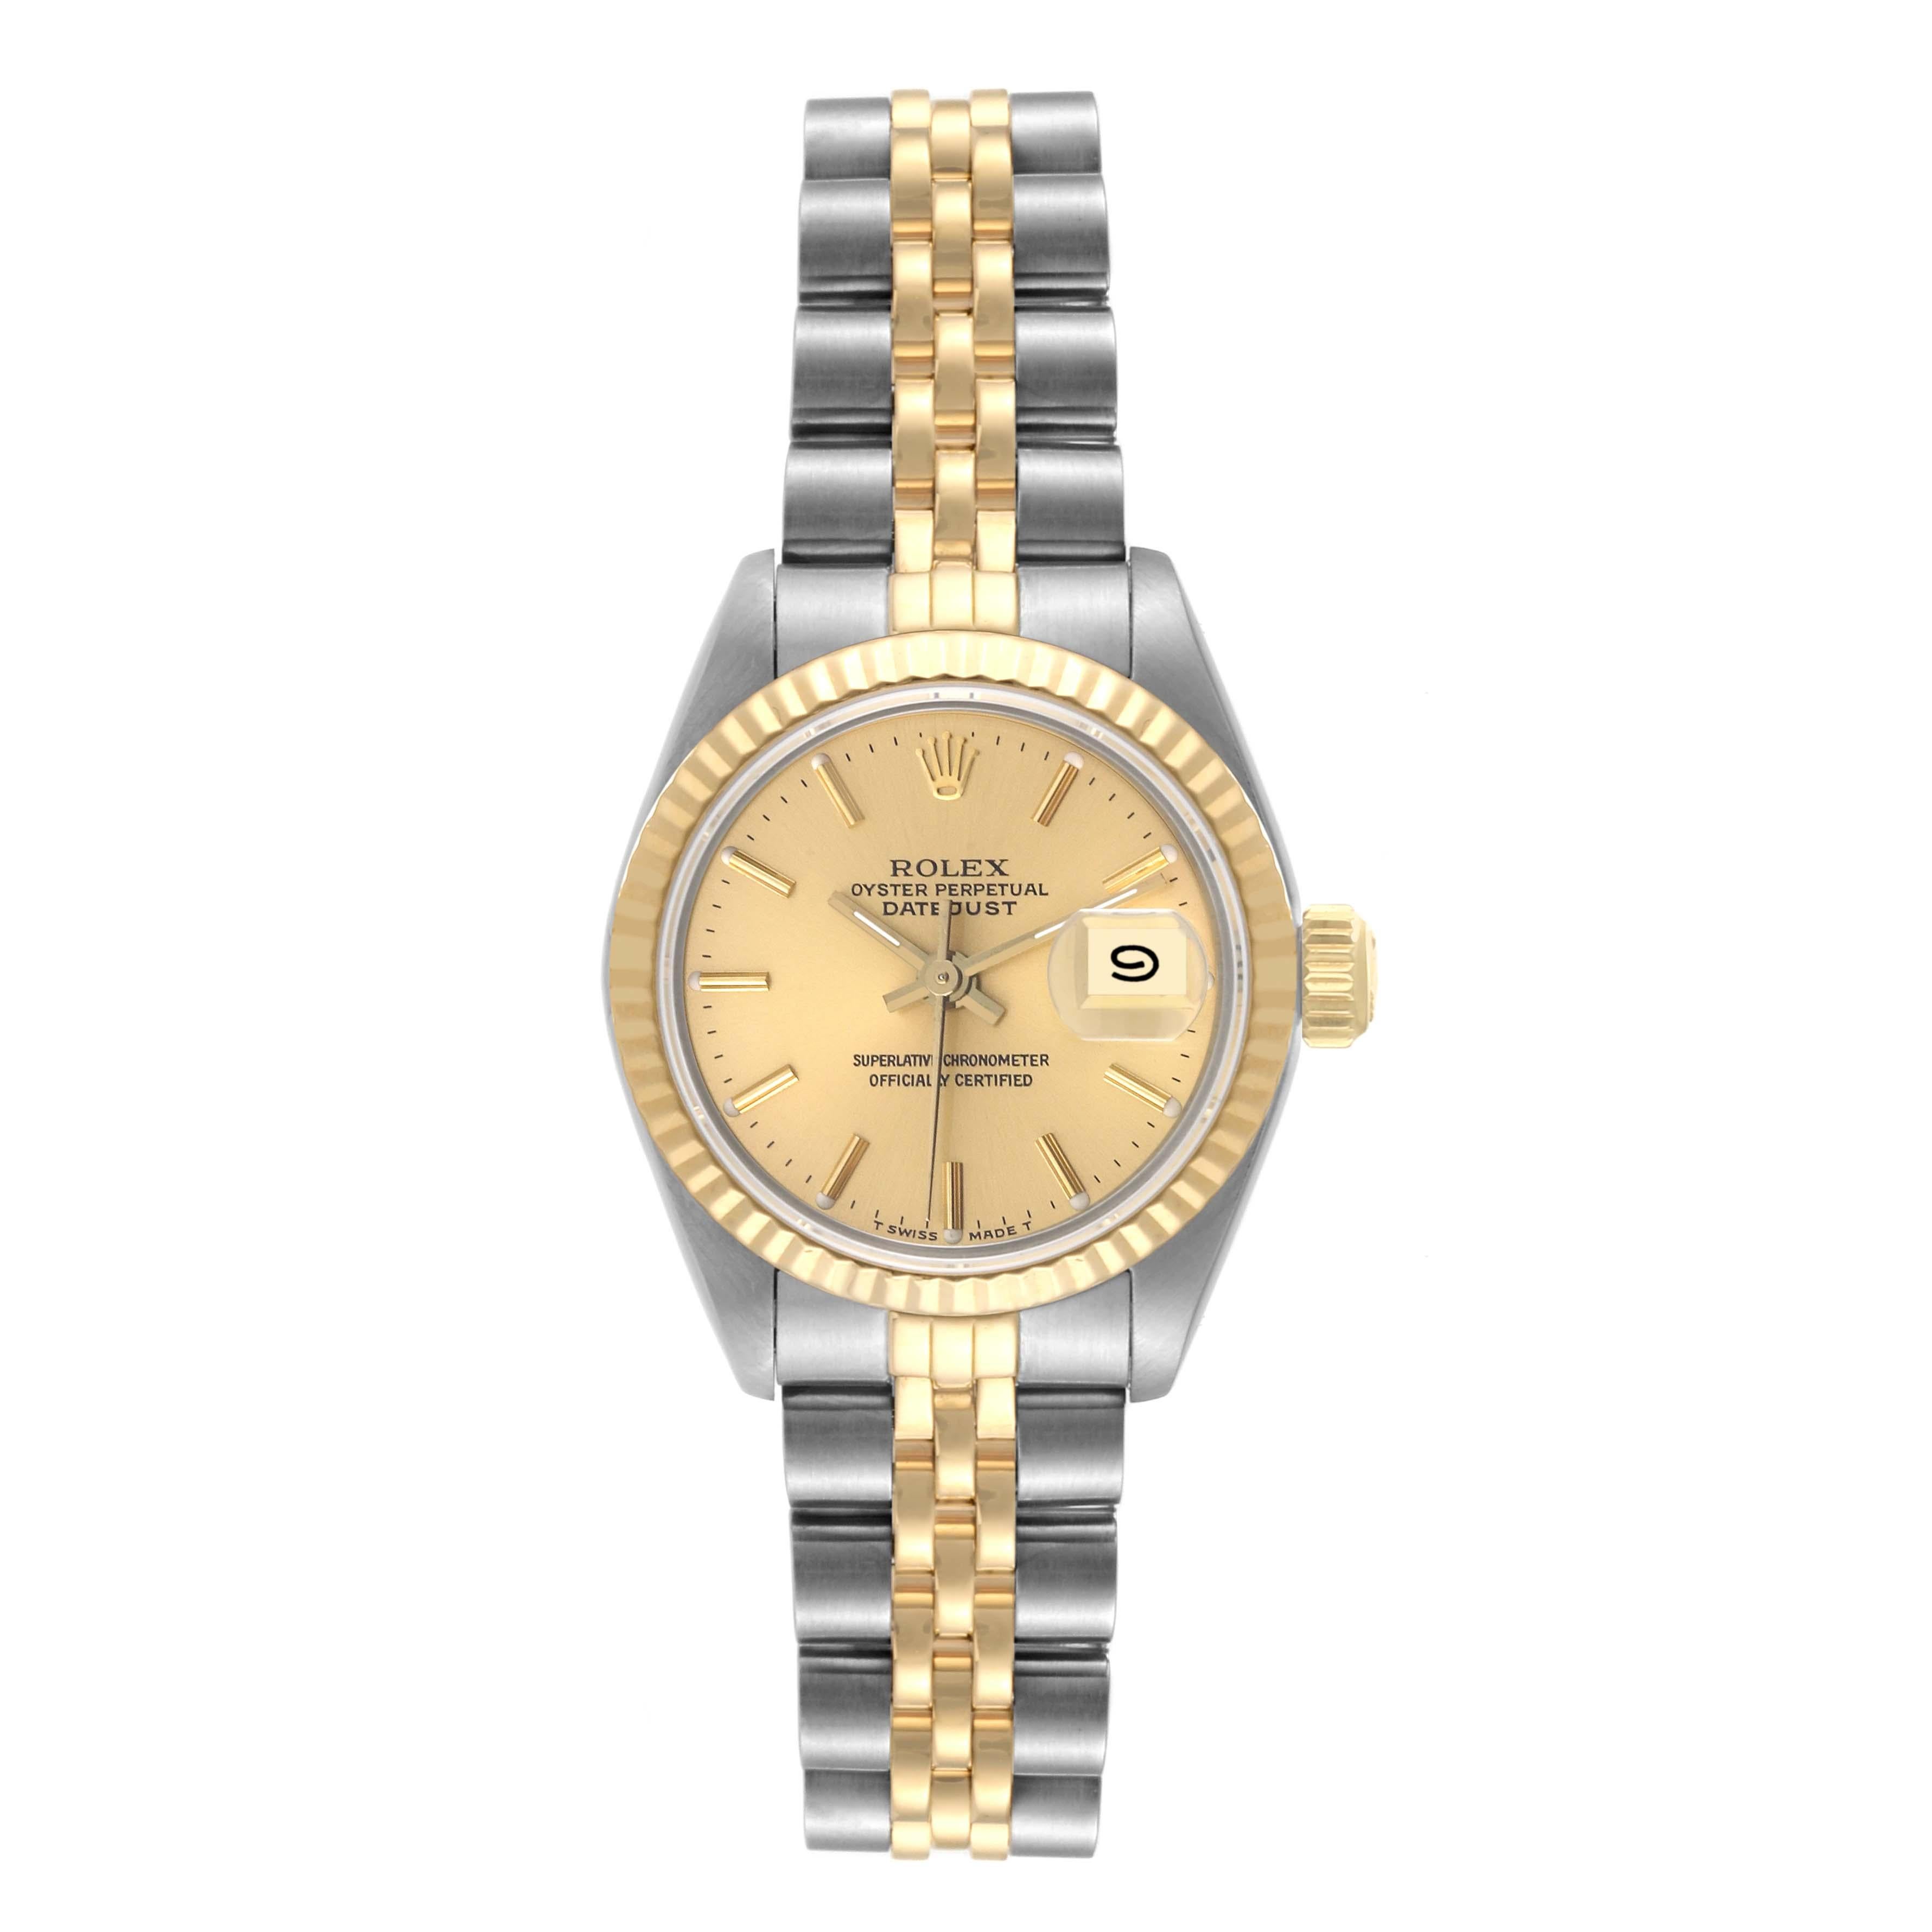 Rolex Datejust Steel Yellow Gold Champagne Dial Ladies Watch 69173. Officially certified chronometer automatic self-winding movement. Stainless steel oyster case 26.0 mm in diameter. Rolex logo on the crown. 18k yellow gold fluted bezel. Scratch